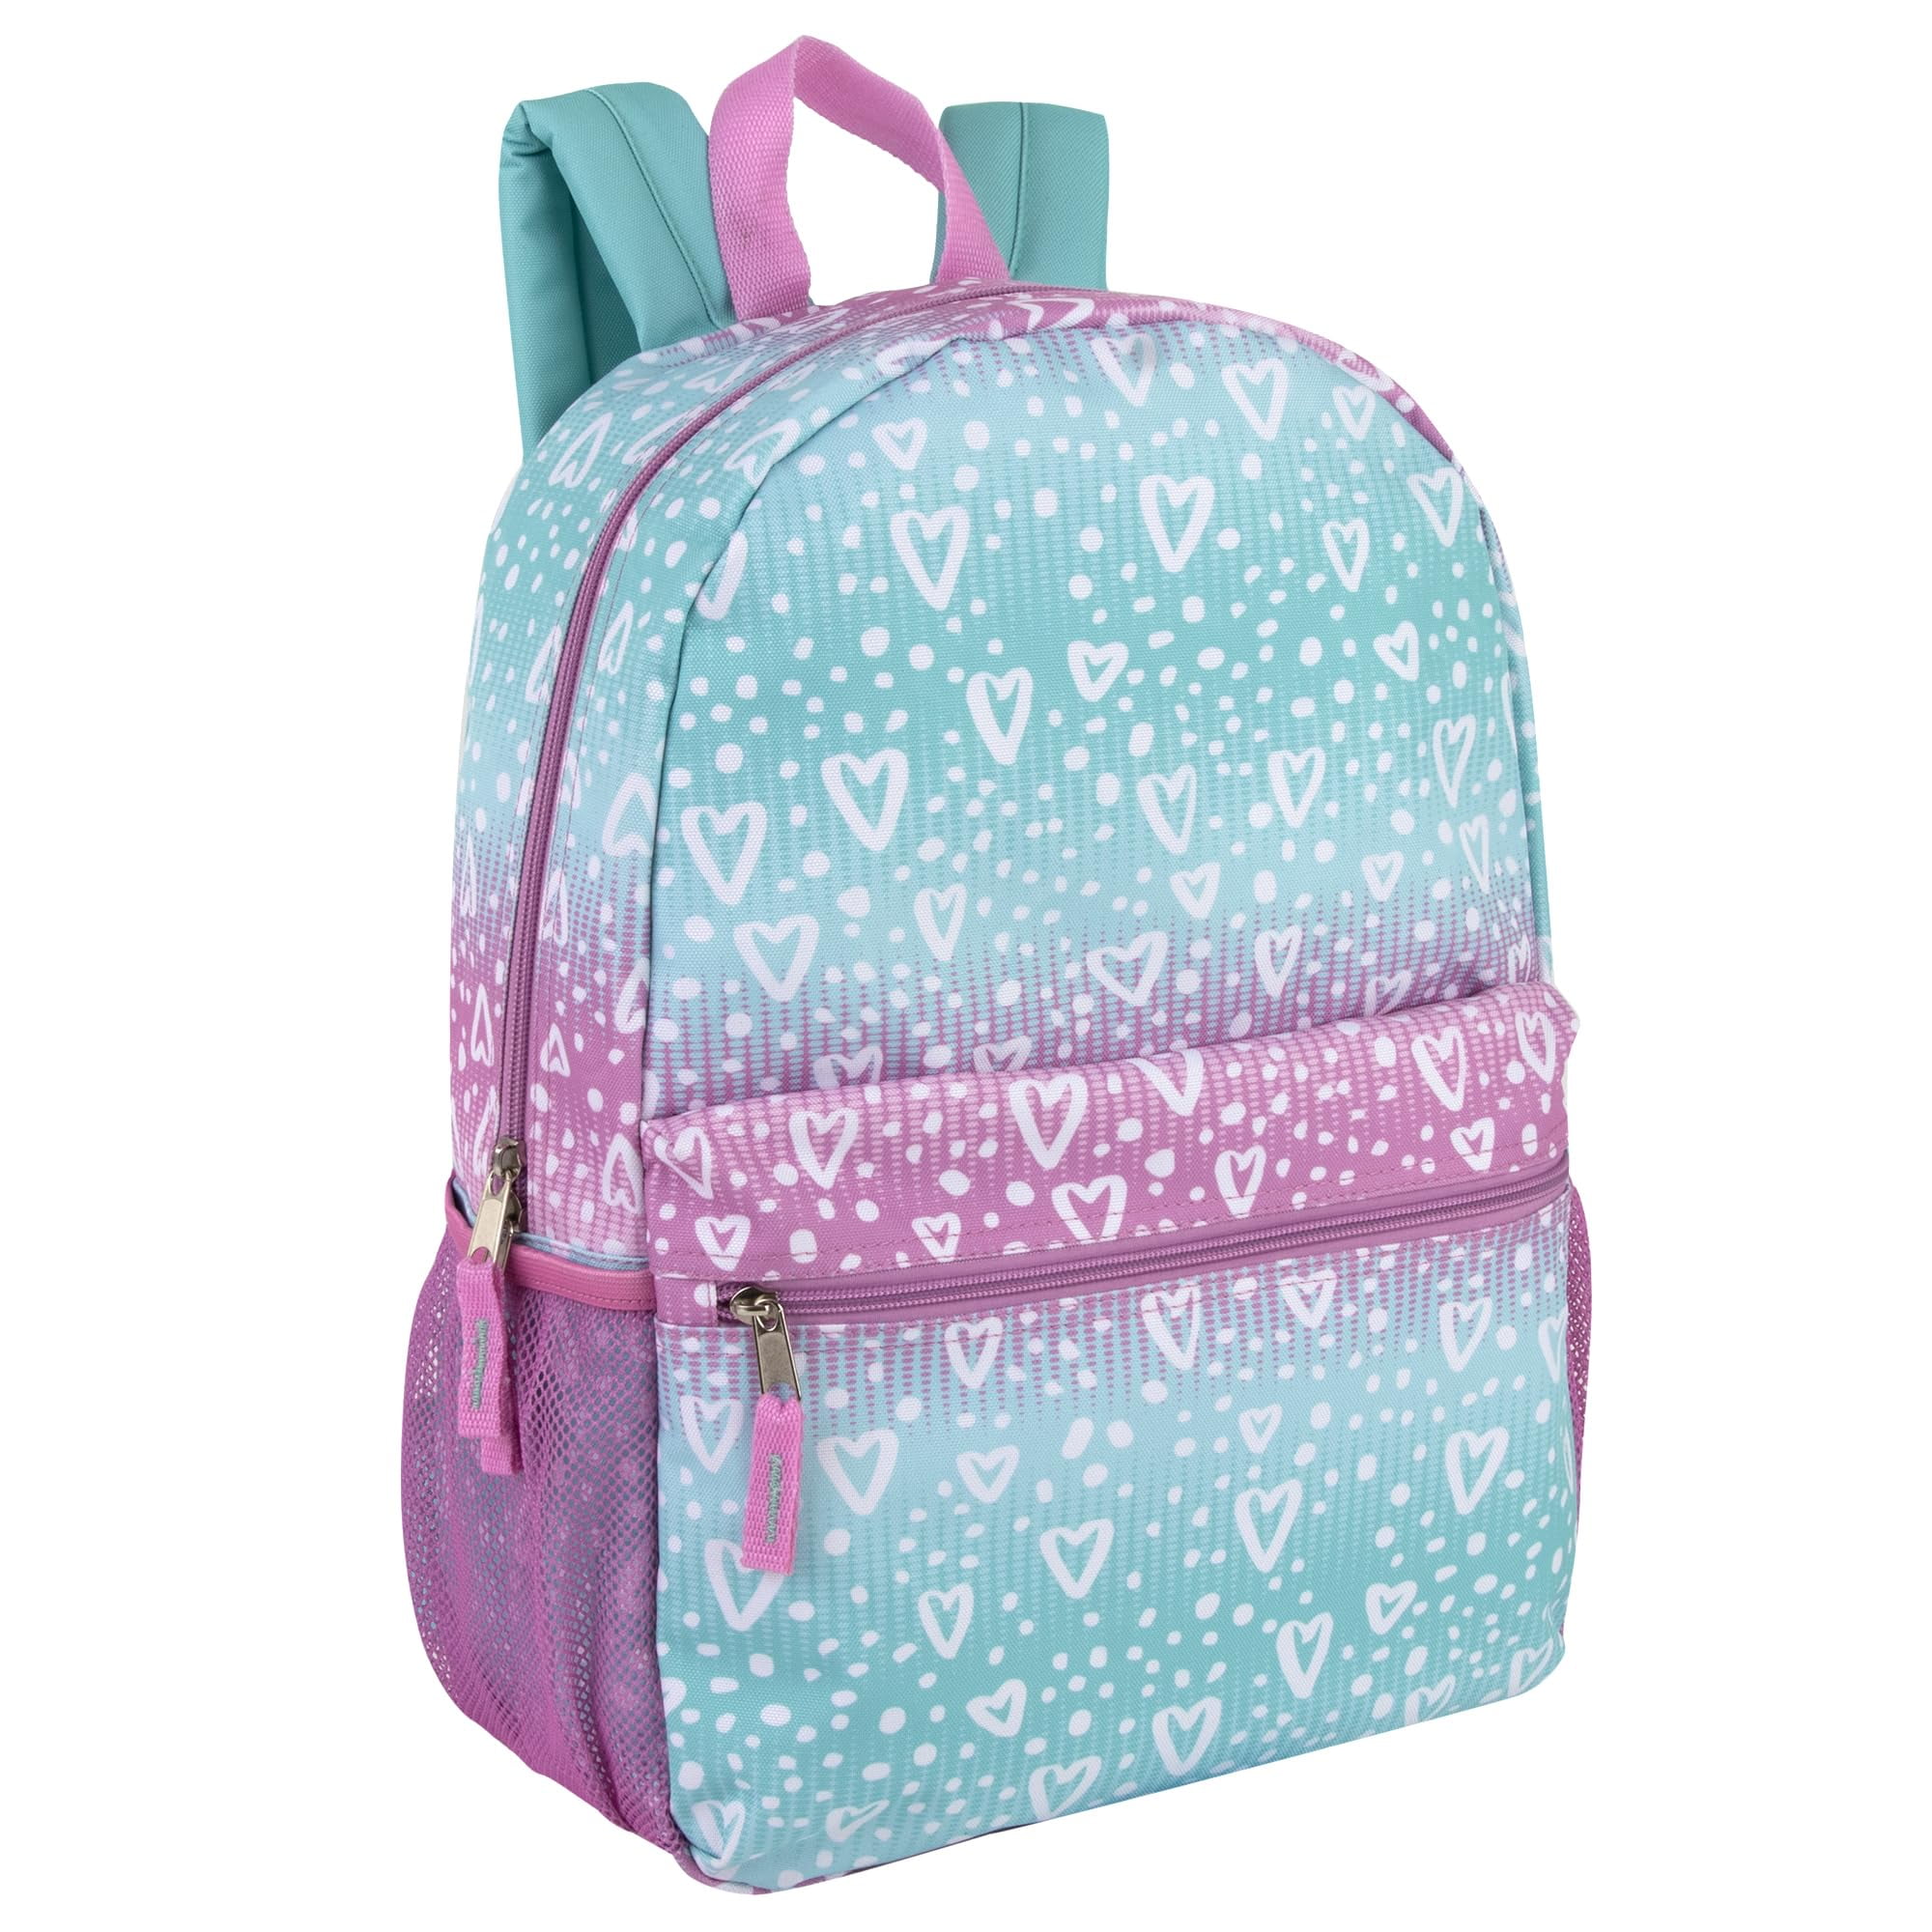 New 17 Inch Backpack with Side Pockets for Girls for School, Travel ...